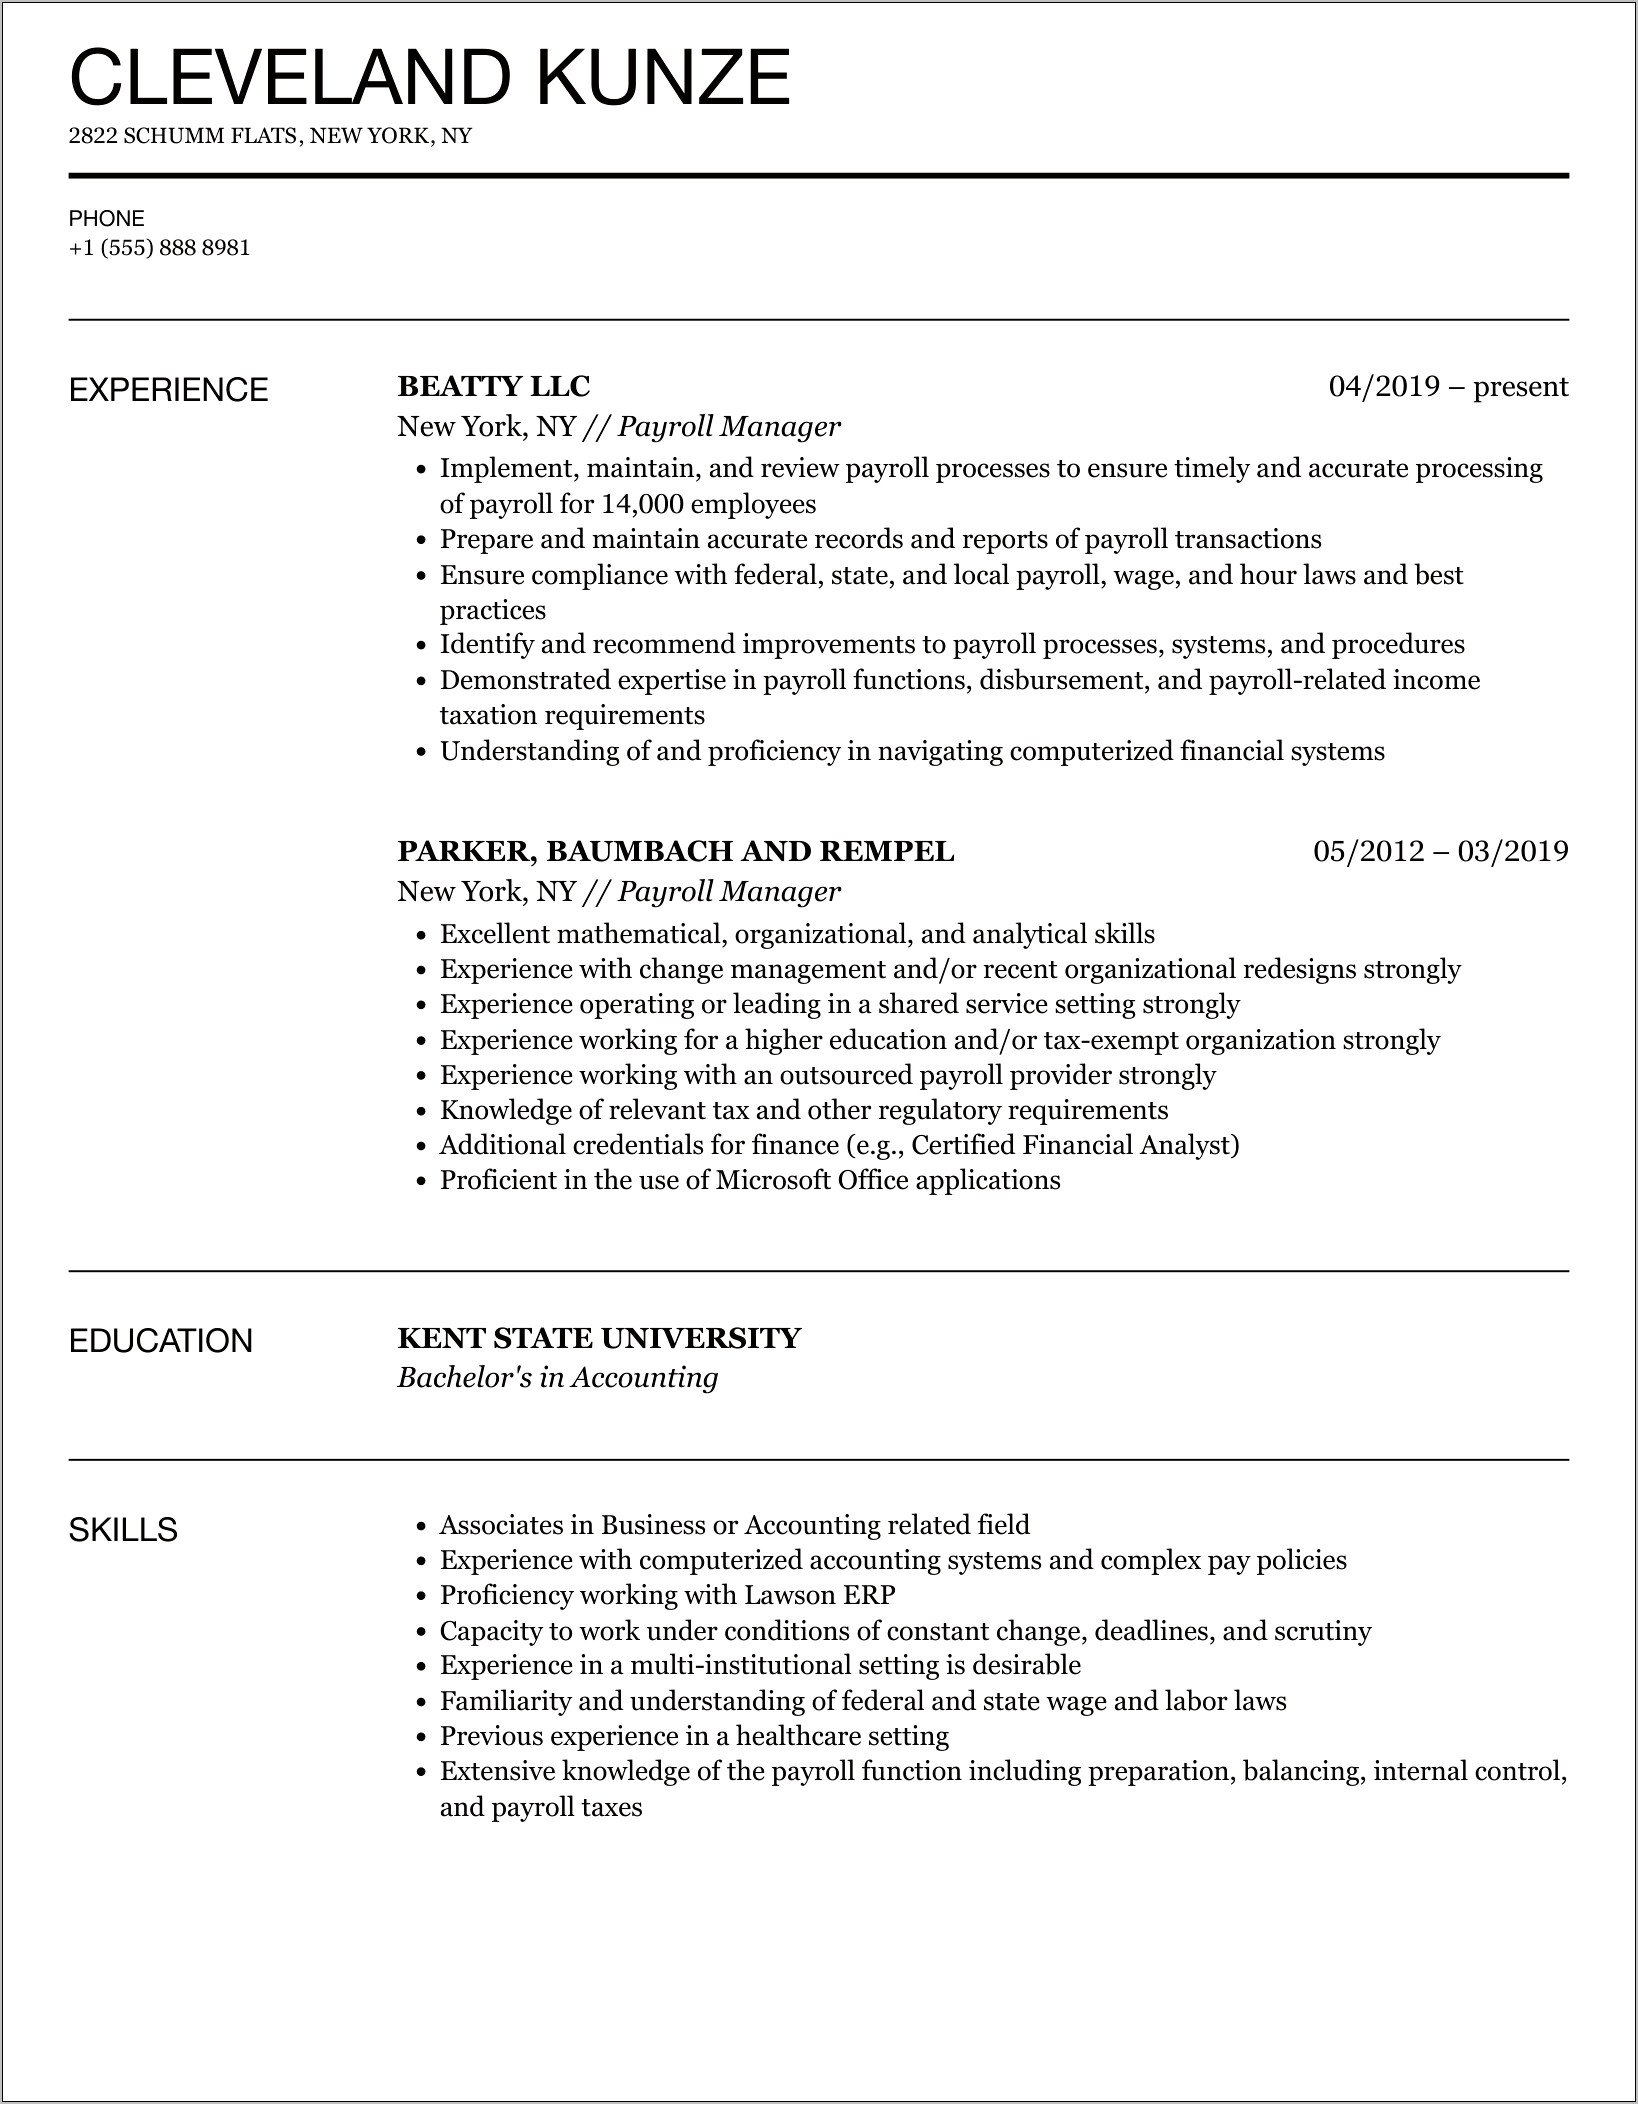 Resume Format For Payroll Manager